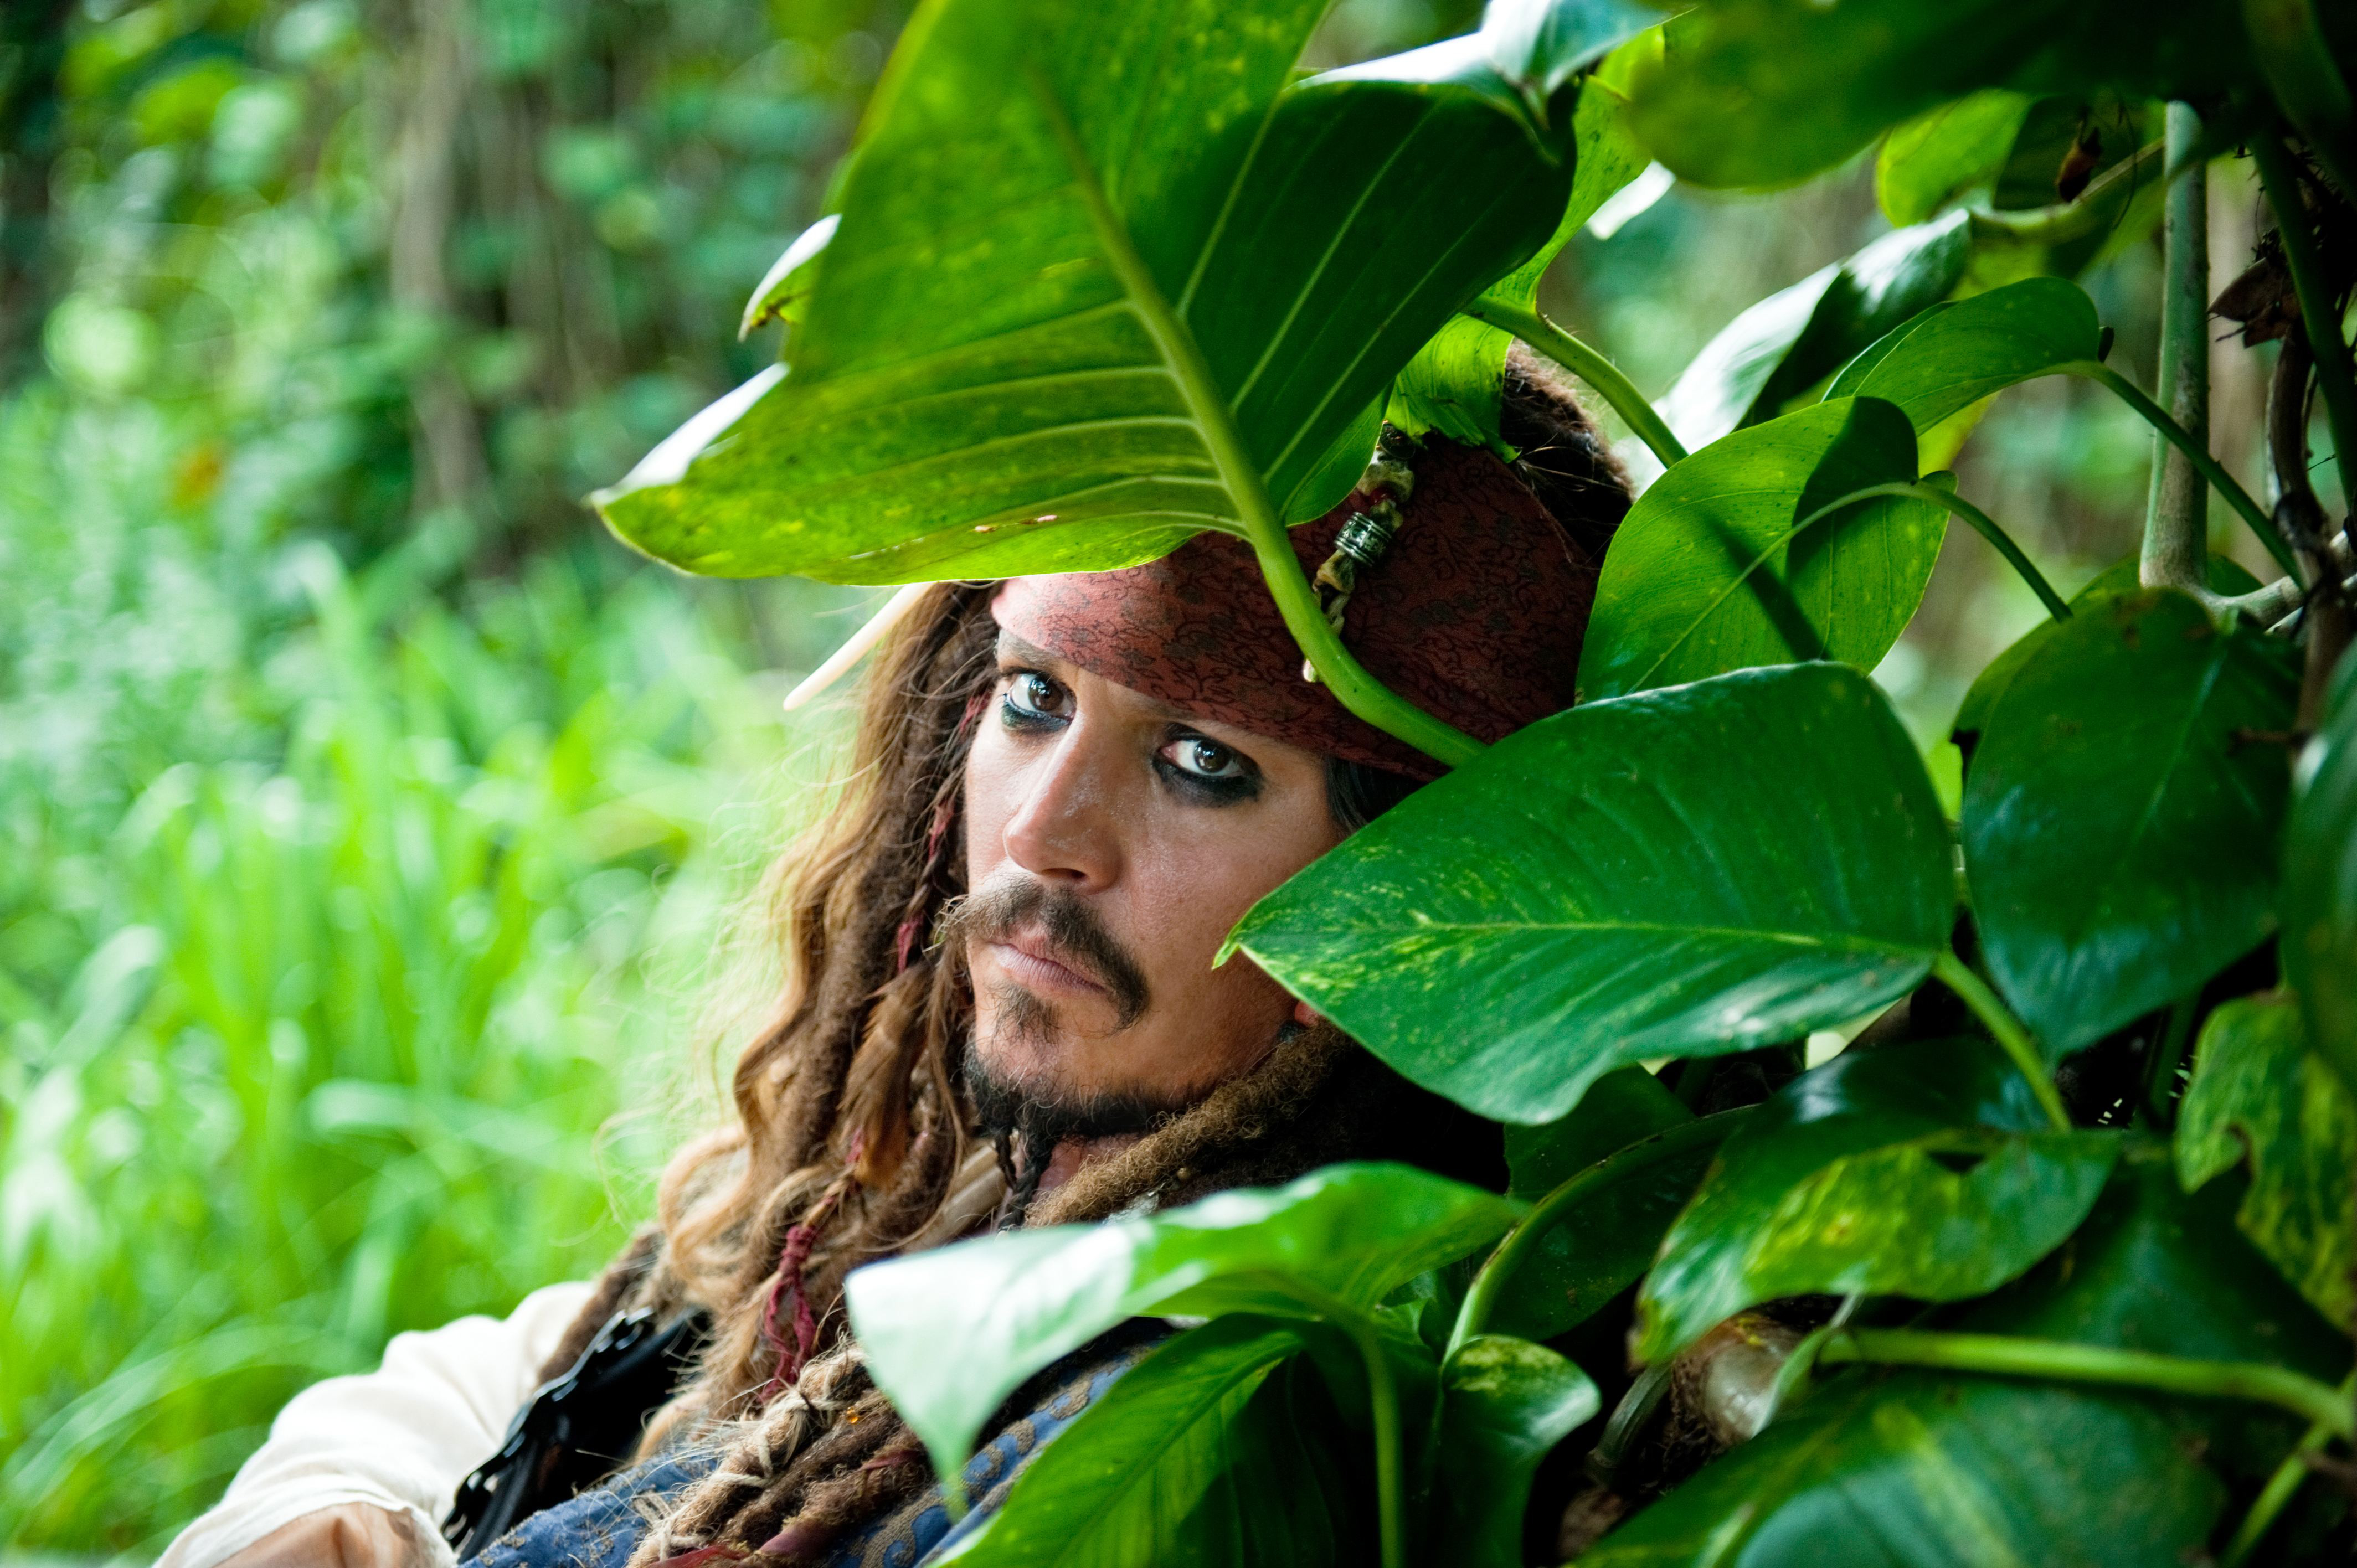 jack sparrow, johnny depp, pirates of the caribbean, movie, pirates of the caribbean: on stranger tides, pirate download HD wallpaper